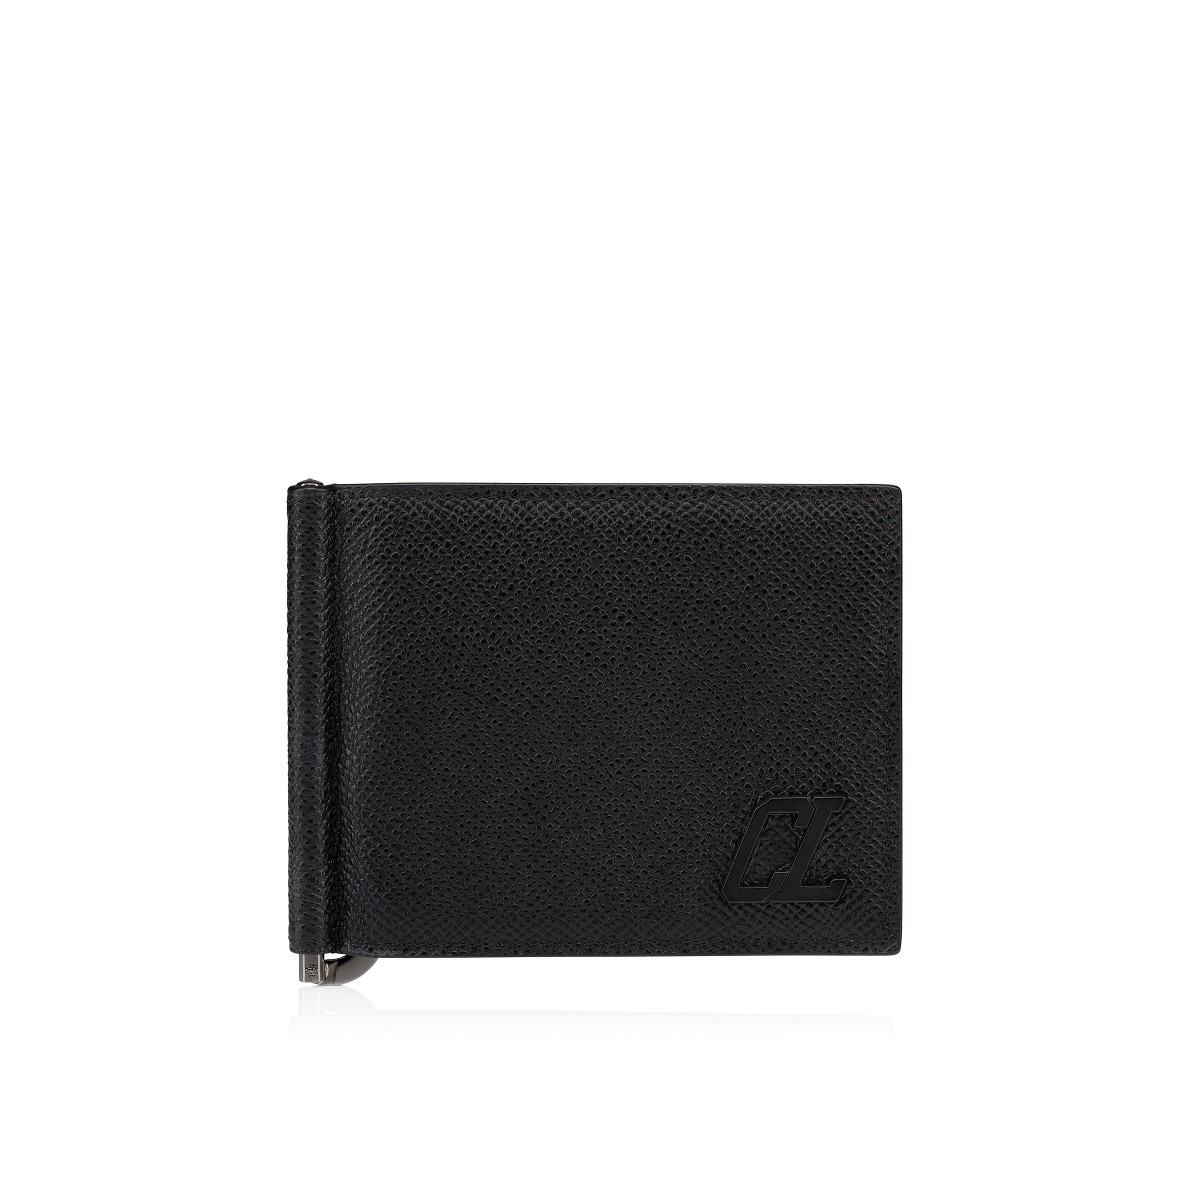 Small Leather Goods - Groovy Wallet - Christian Louboutin